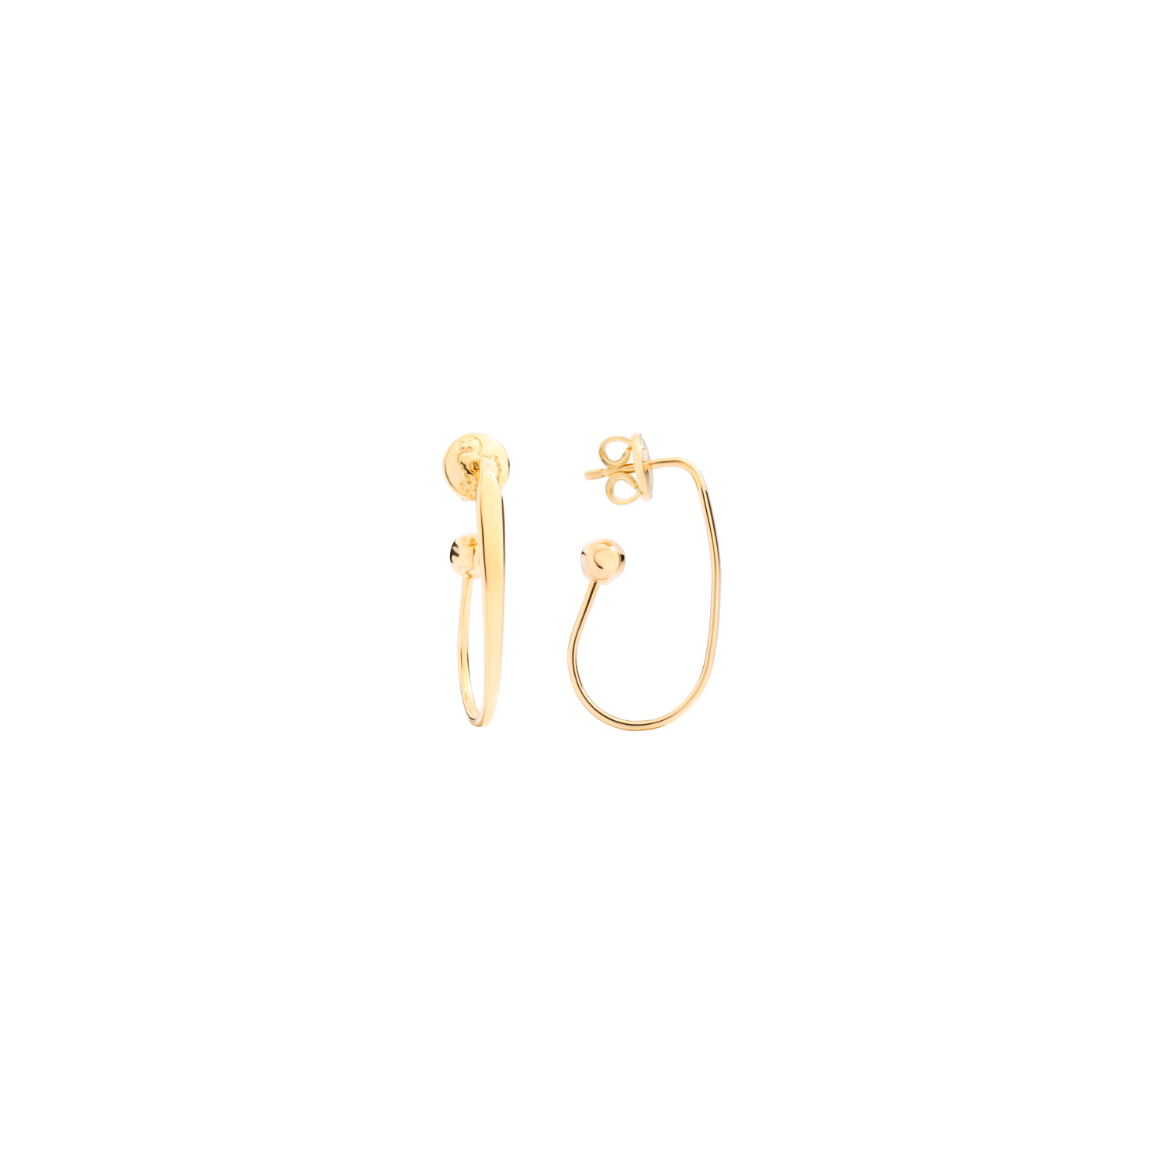 DOB9003_OHOOS_000OG_010_Dodo_essentials-oval-earrings-18k-yellow-gold.png